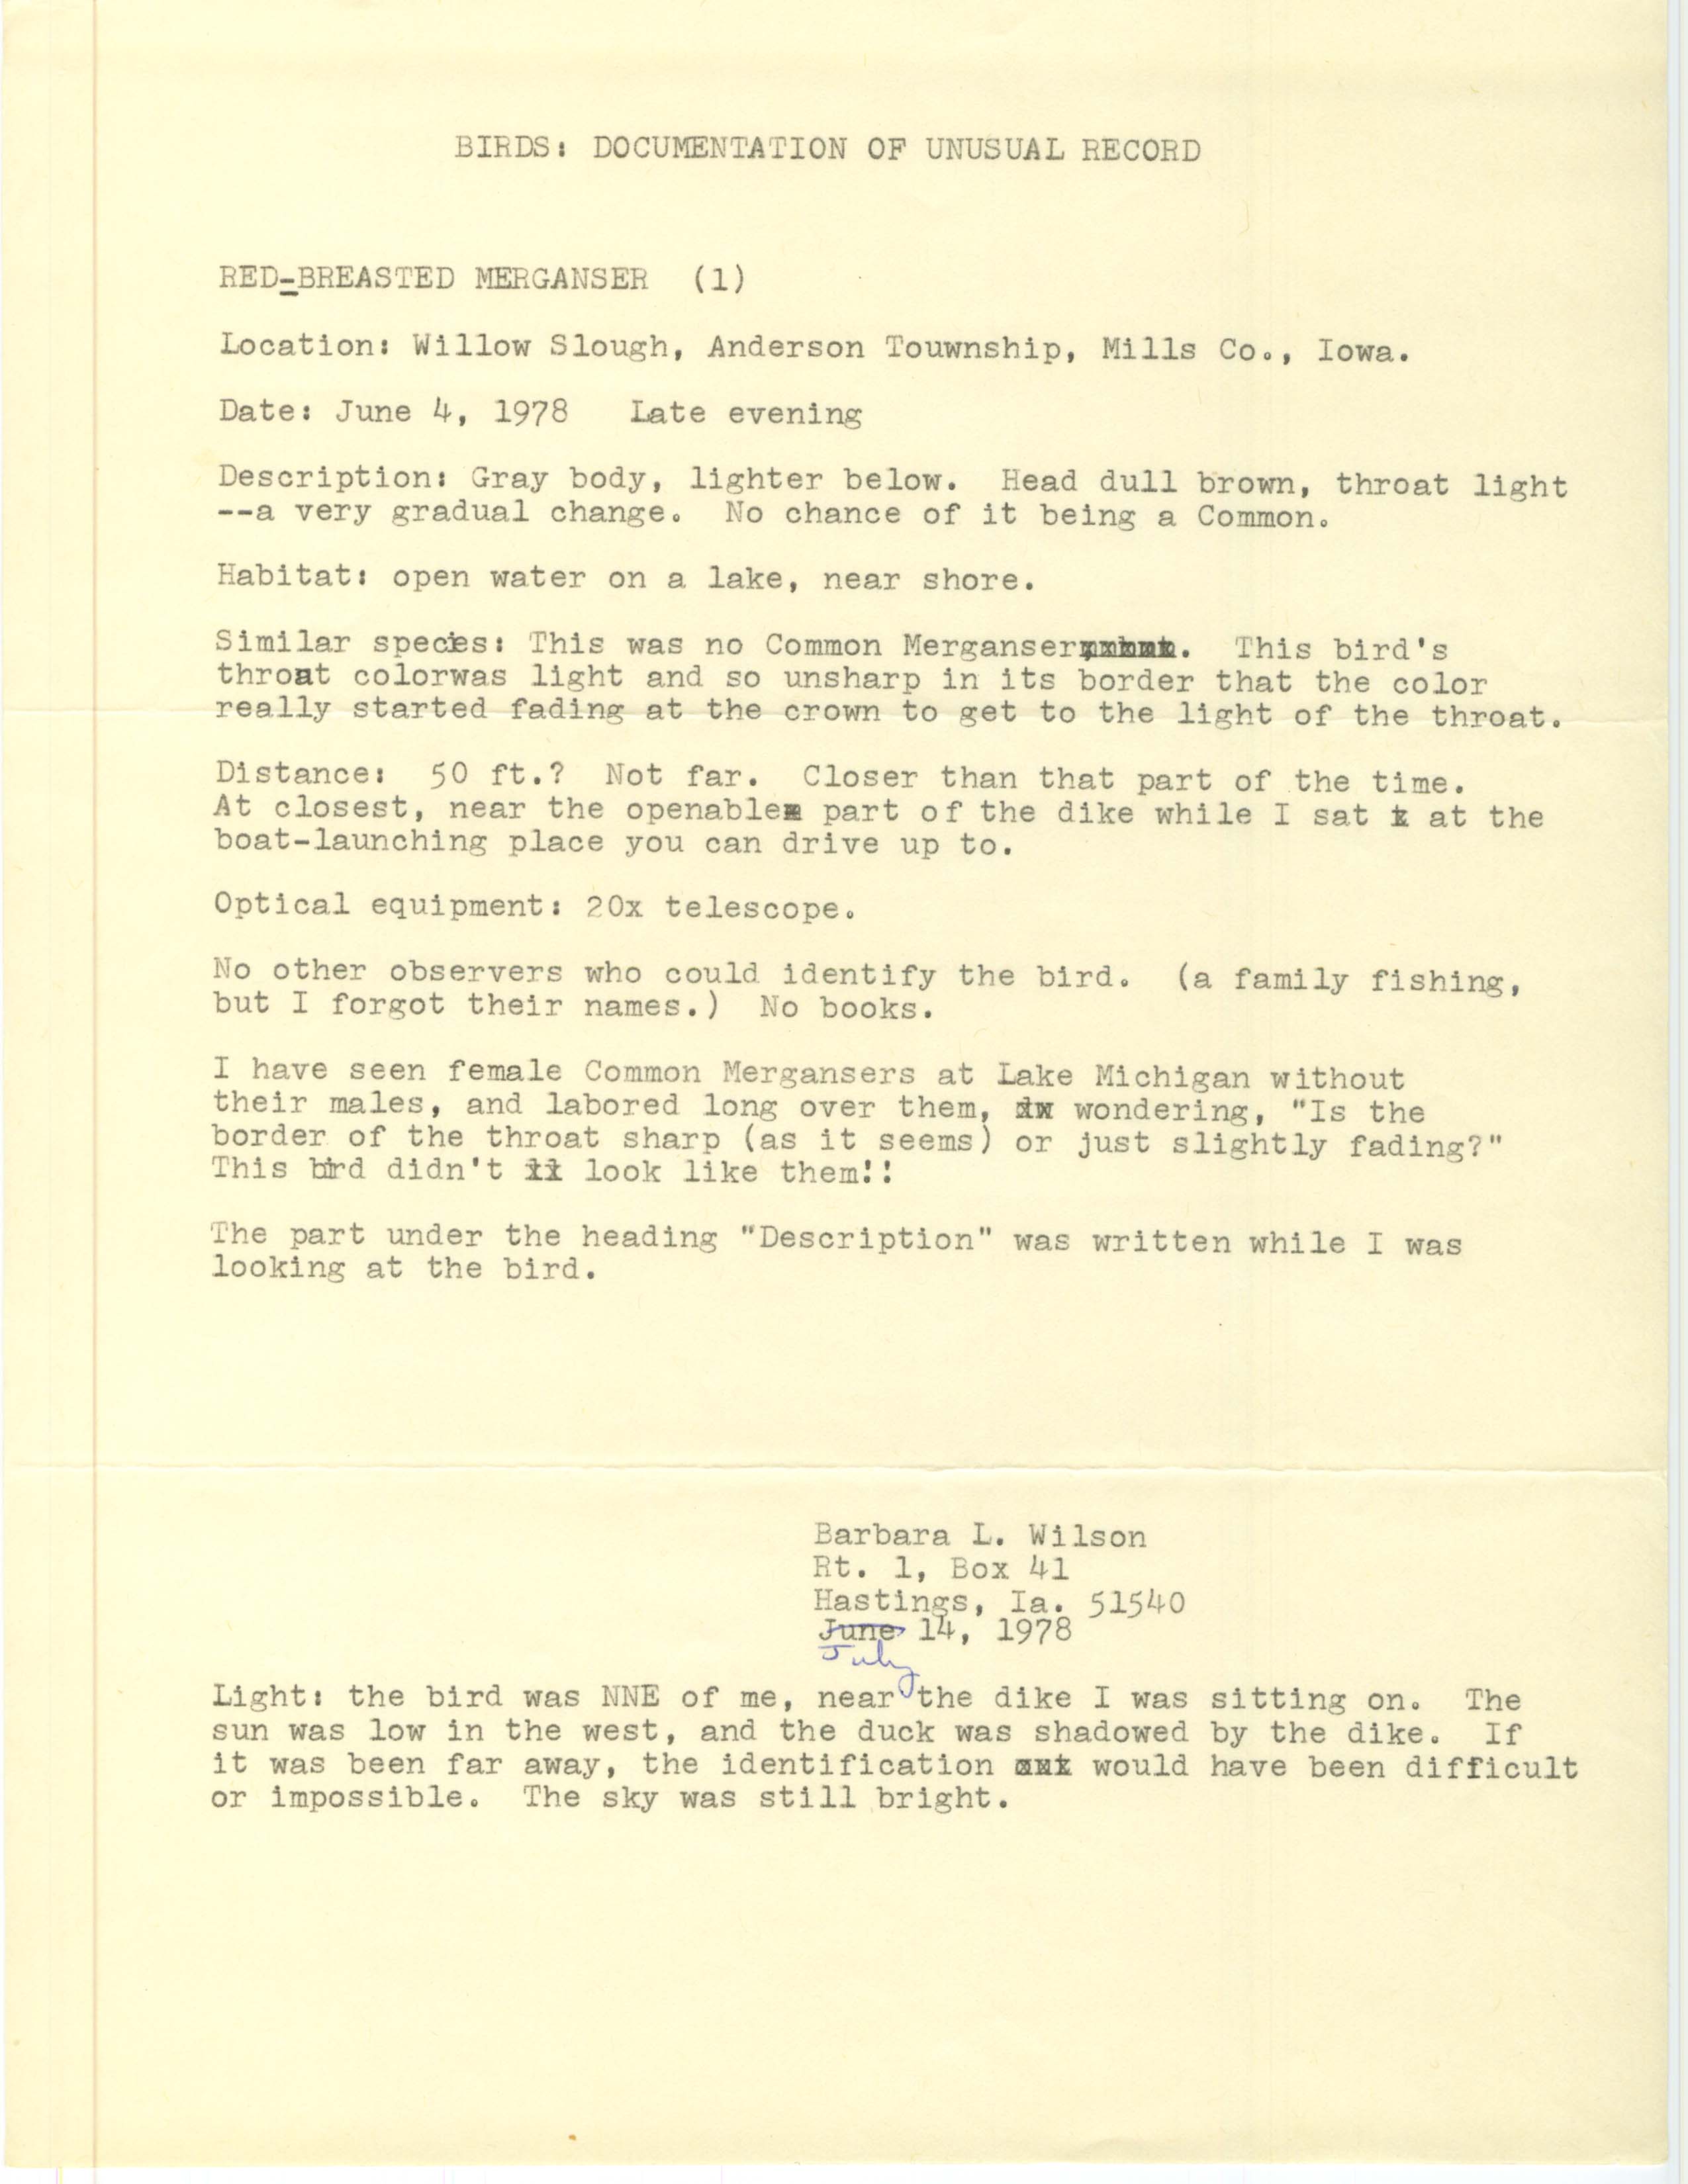 Rare bird documentation form for Red-breasted Merganser at Willow Slough, 1978